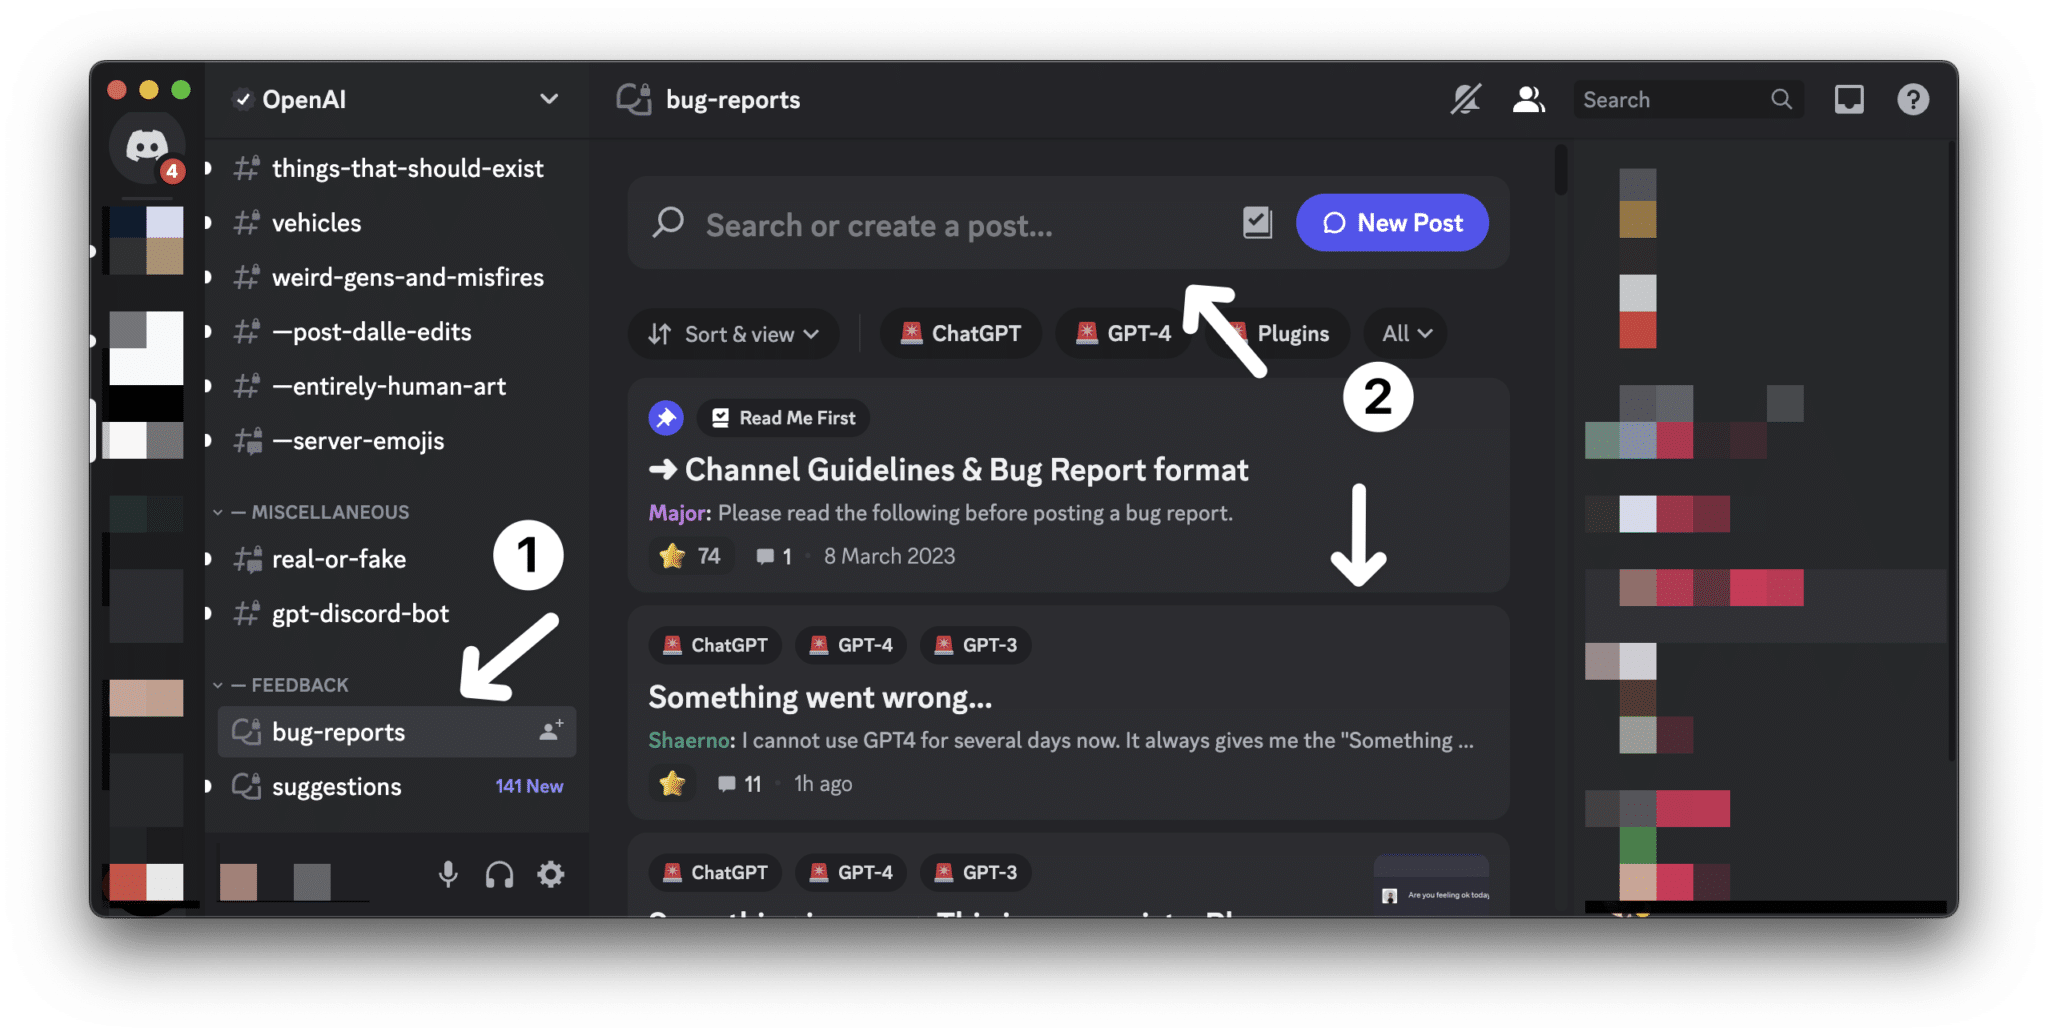 Check whether the issue is being reported at the OpenAI discord server